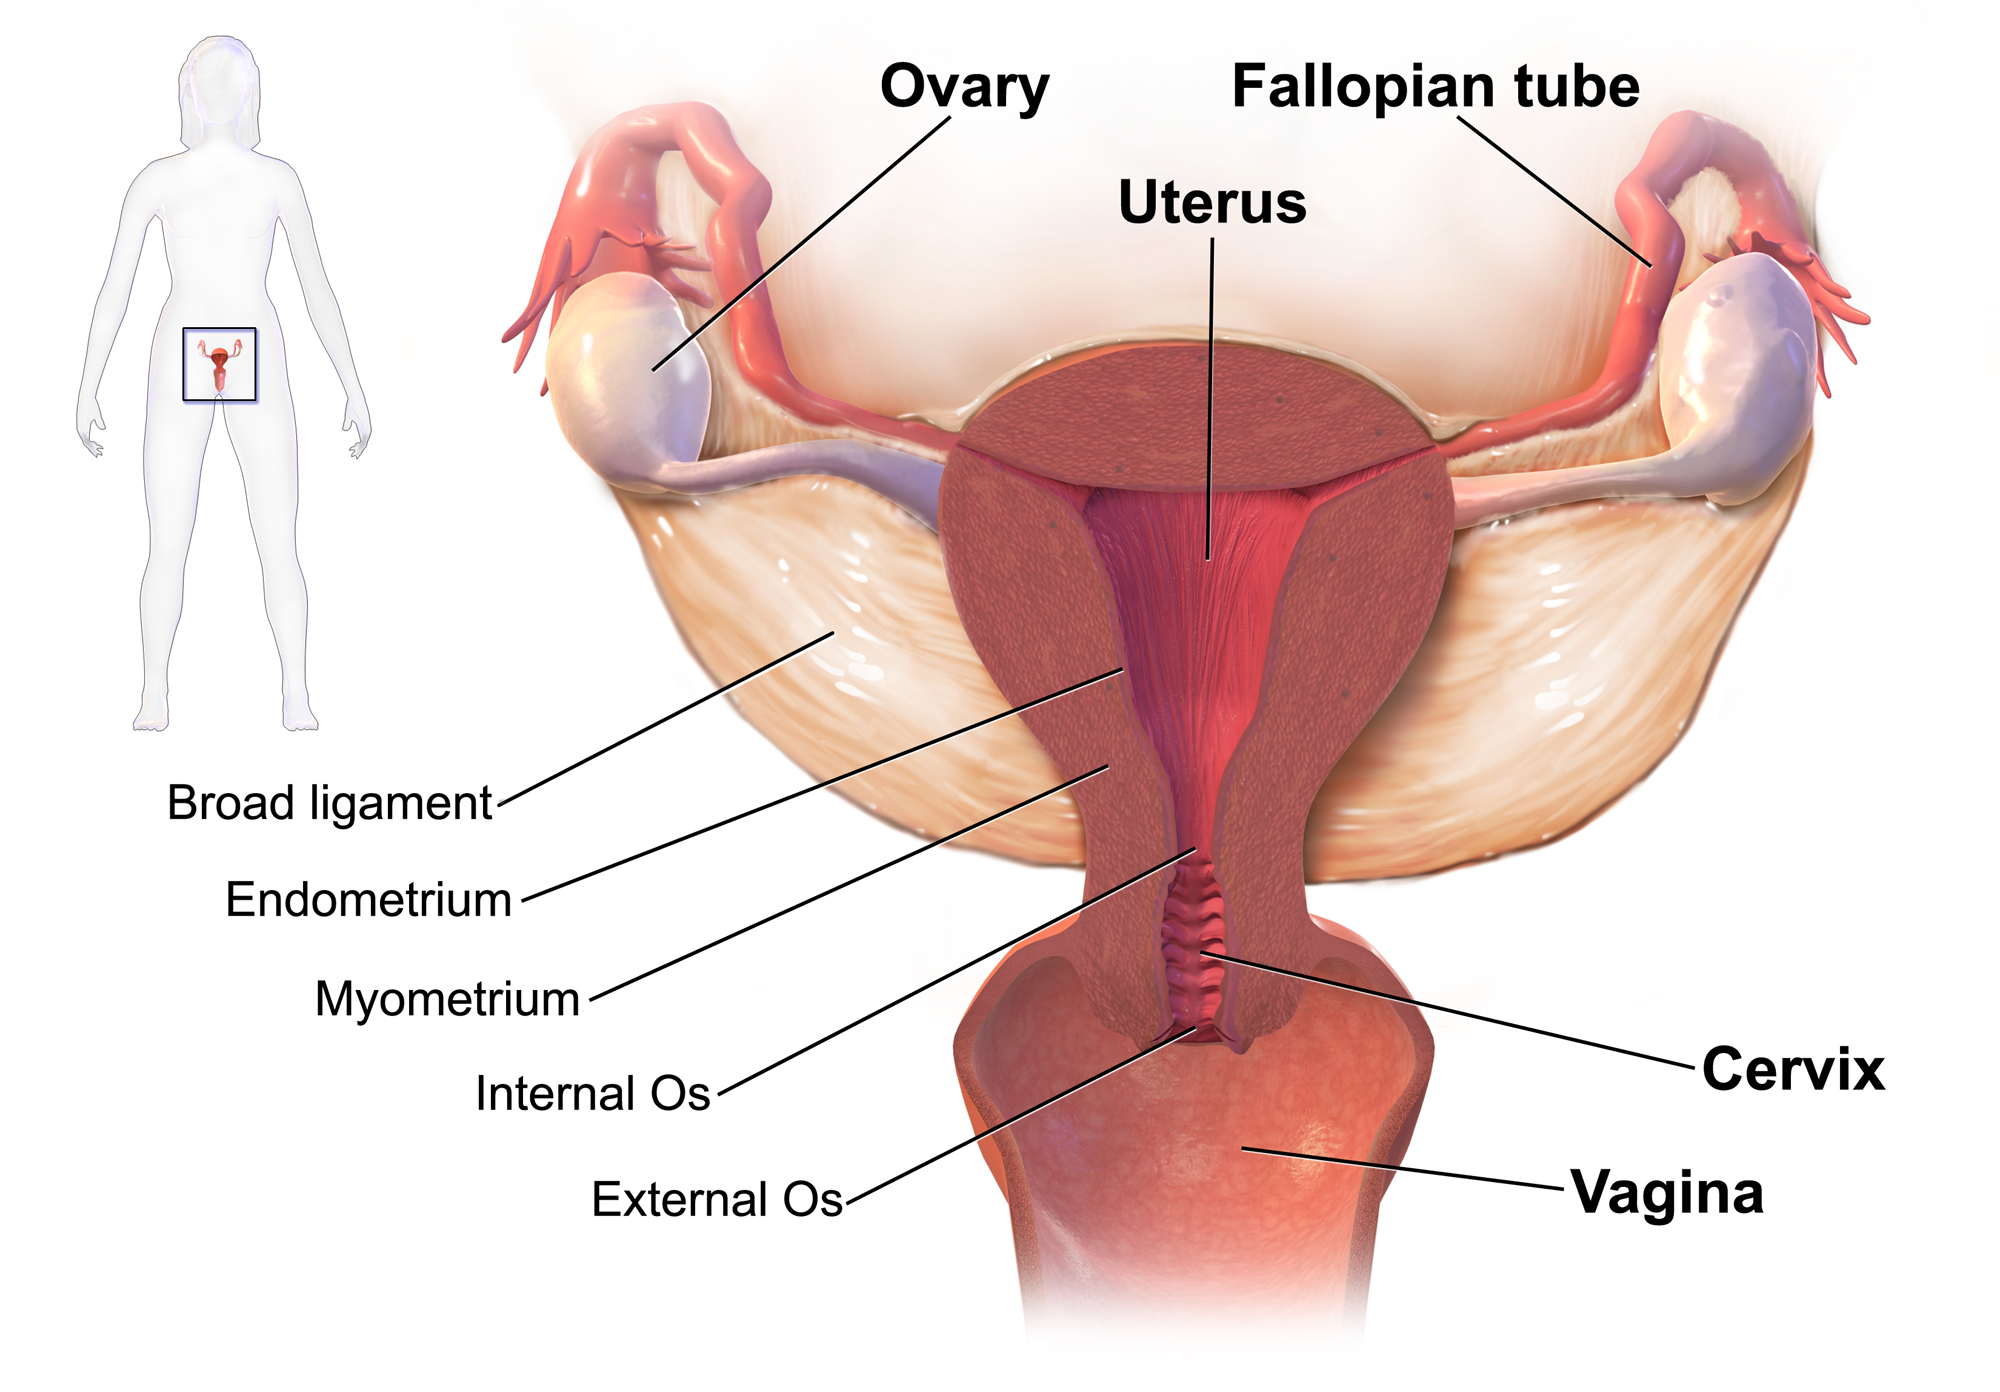 PID can involve any organs of the upper female genital tract (source)